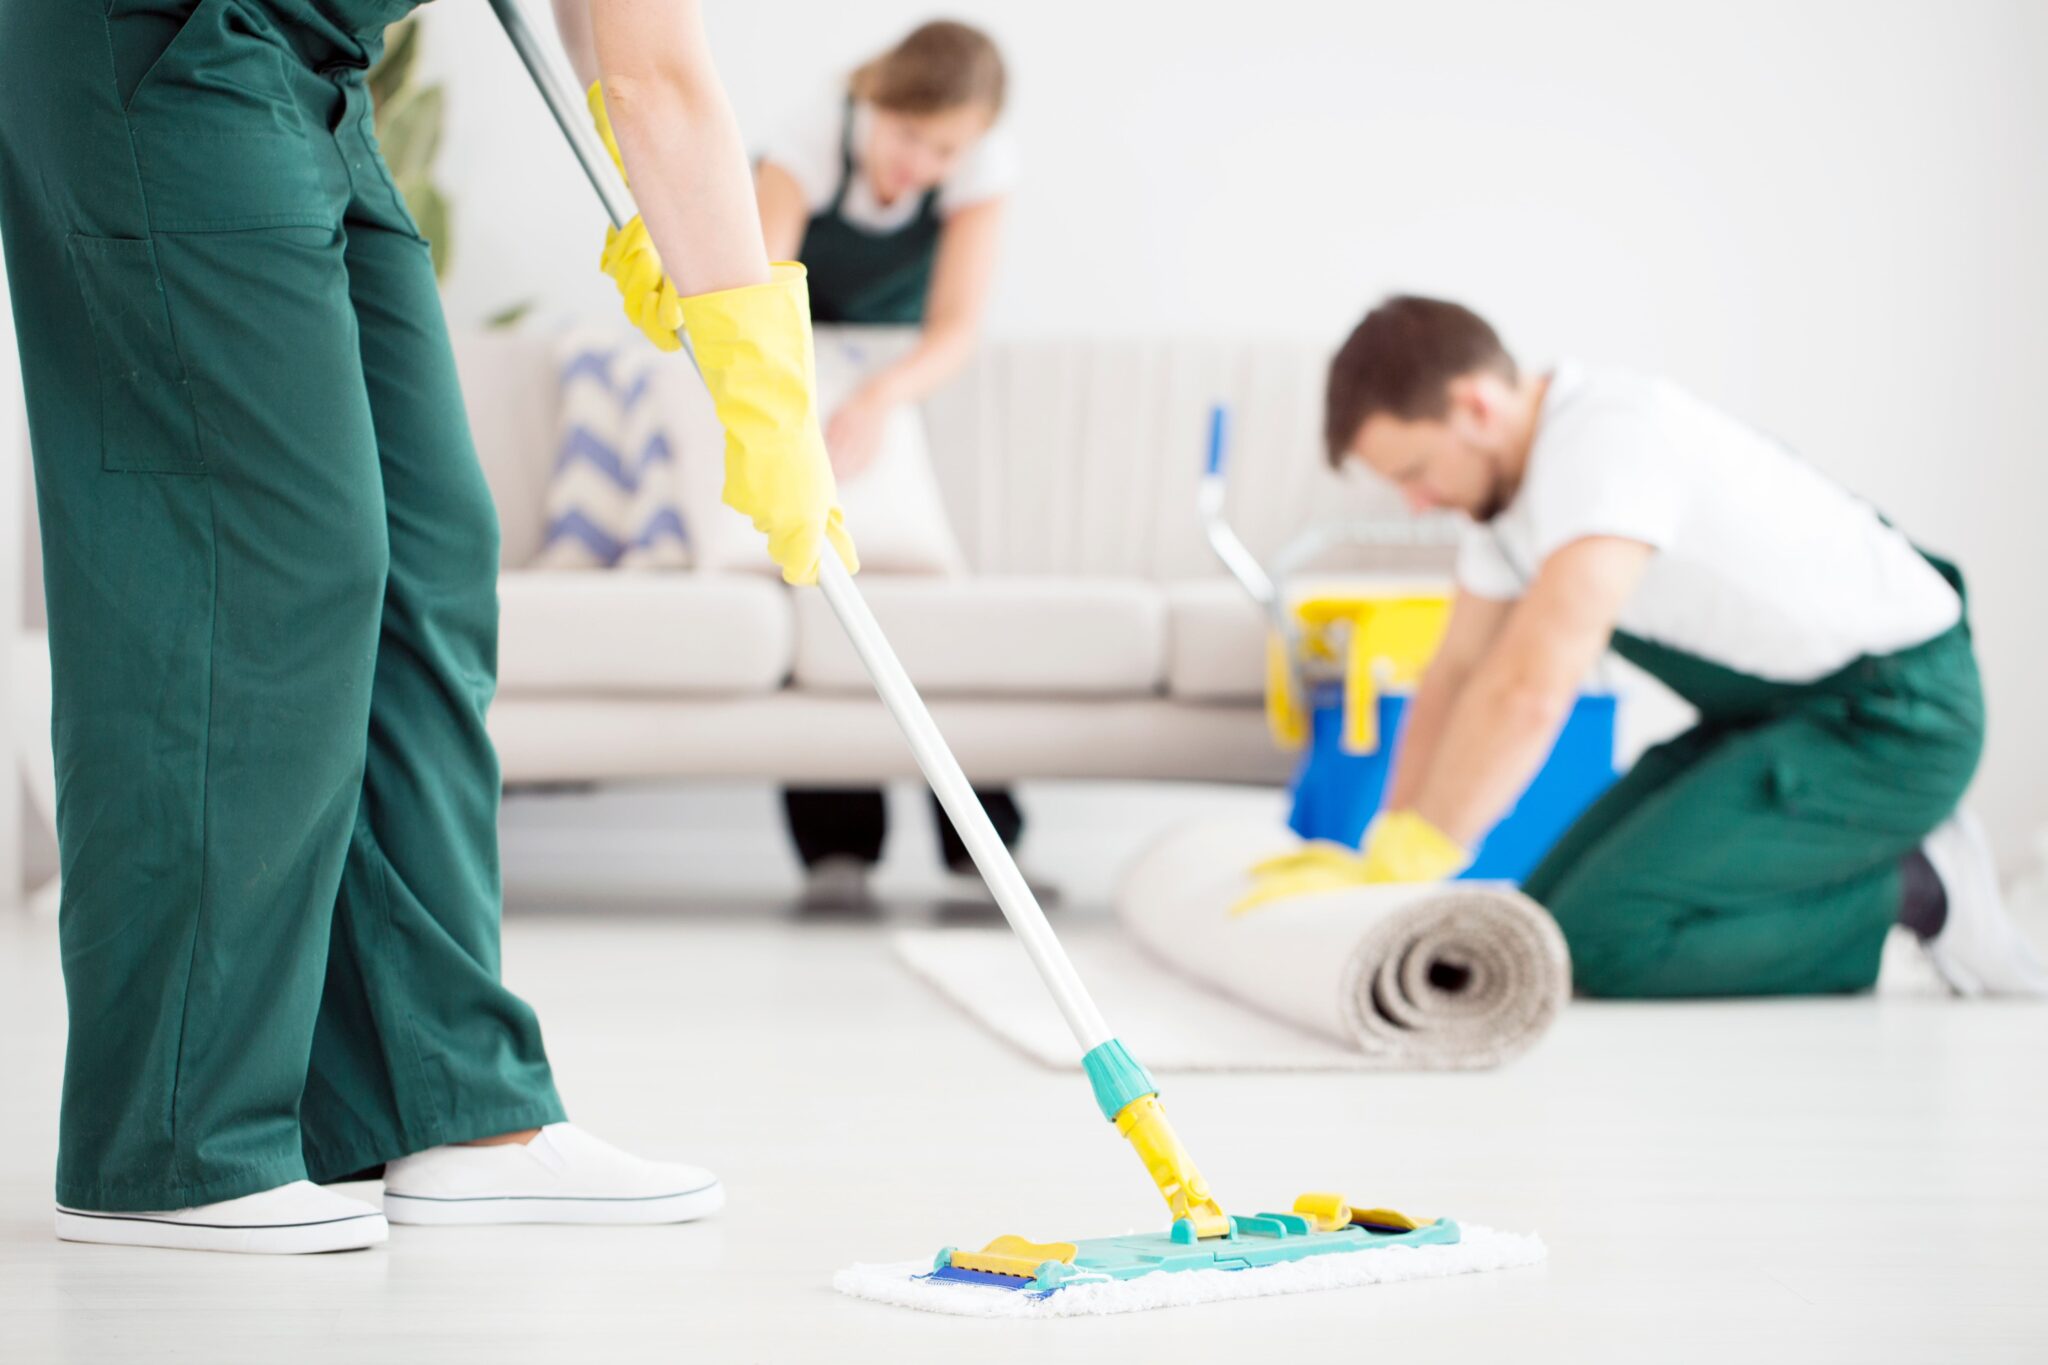 hire local cleaning company for house cleaning